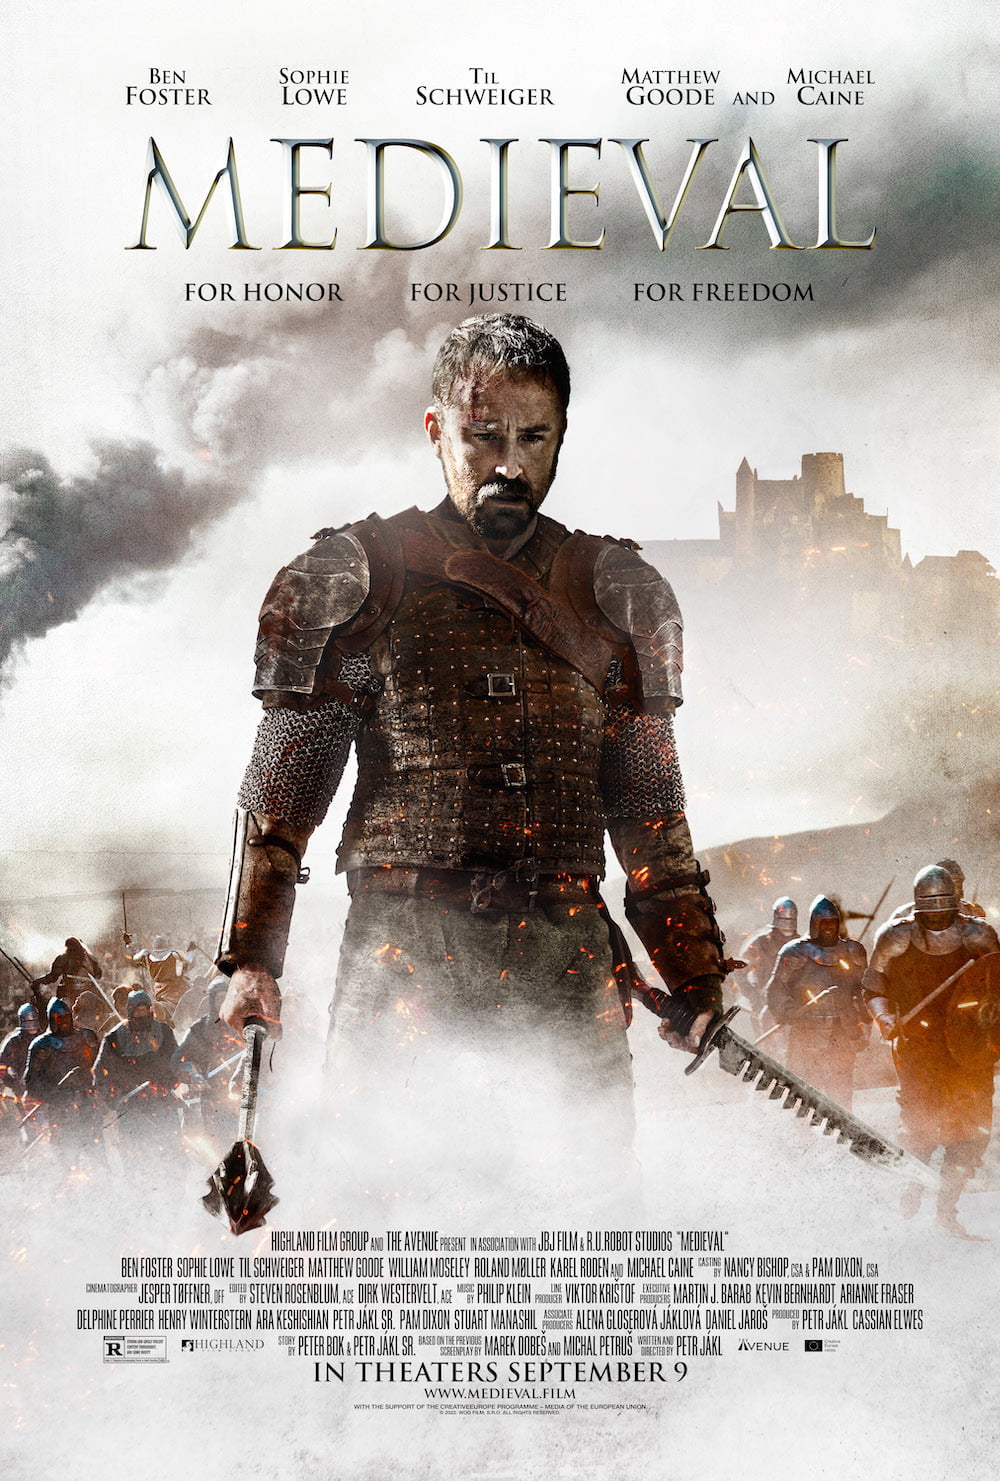 Medieval Movie 2022, Official Trailer, Release Date, HD Poster 